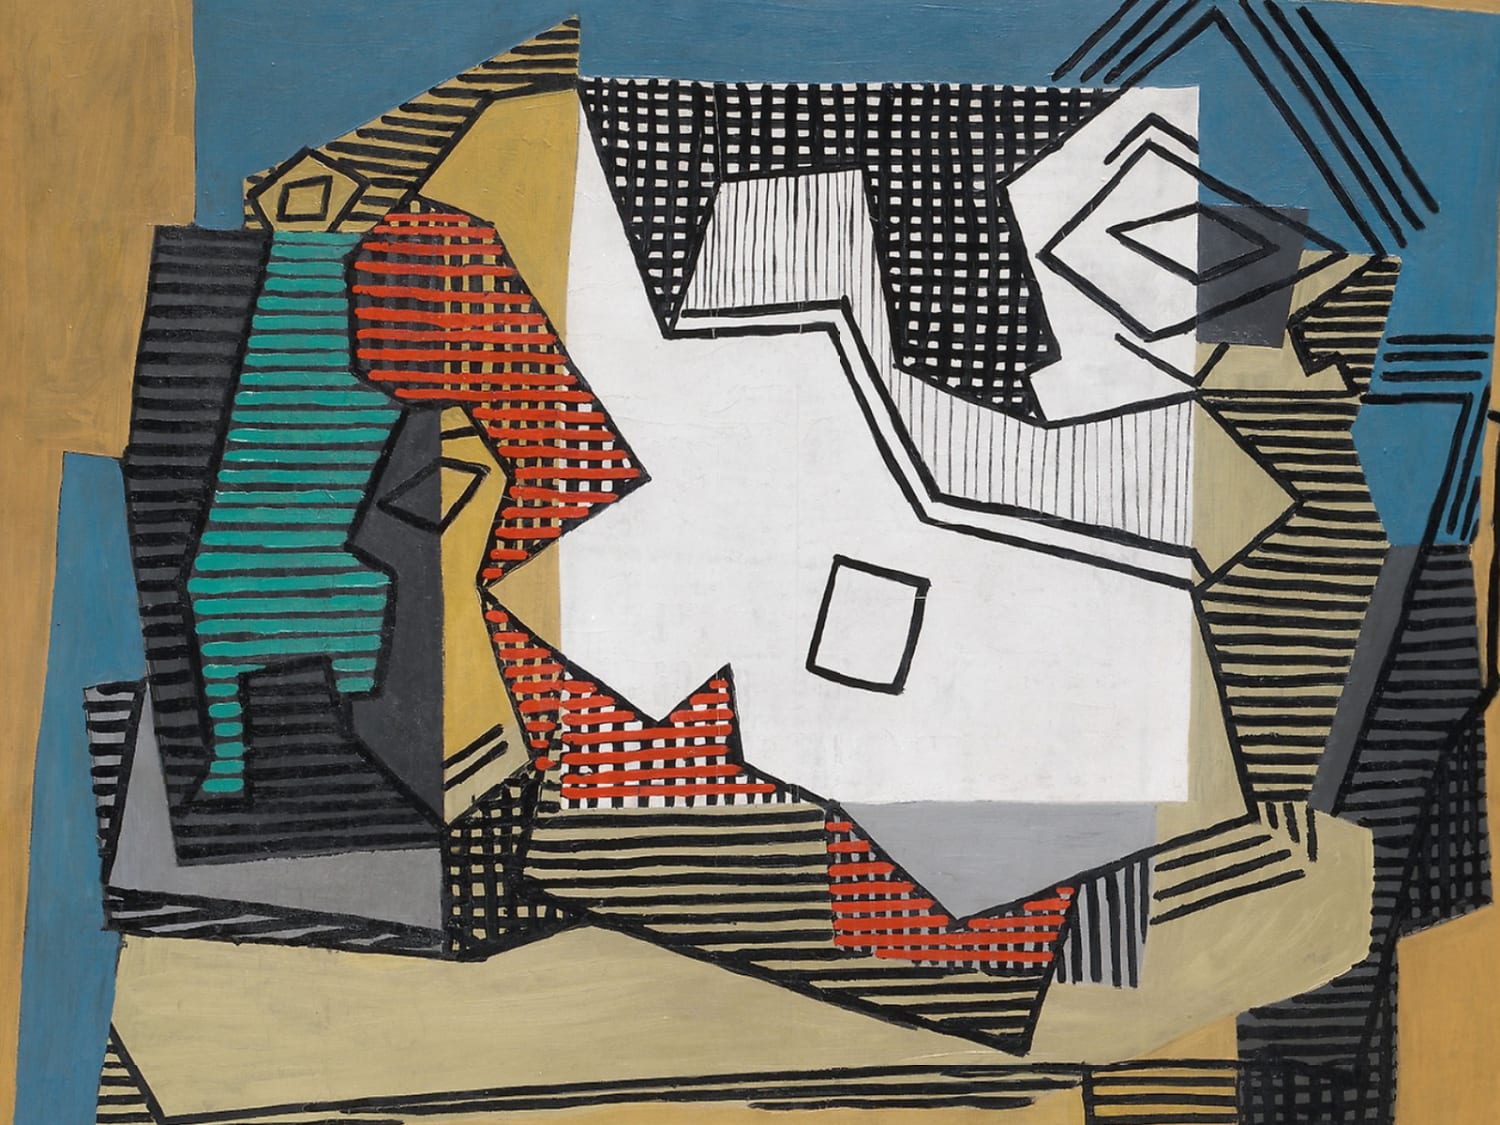 Abandoned Artwork Discovered Beneath Pablo Picasso Painting